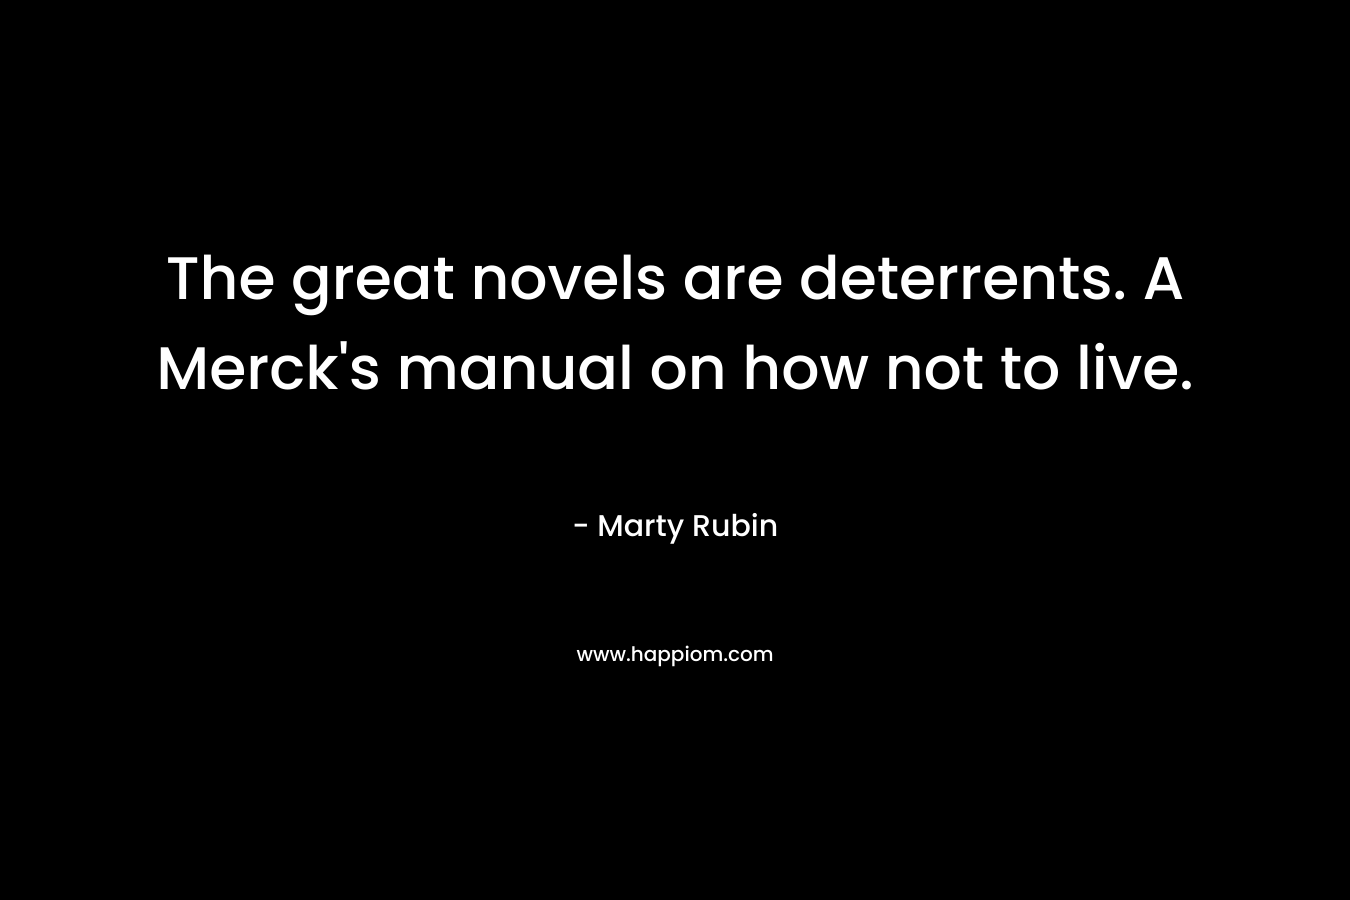 The great novels are deterrents. A Merck’s manual on how not to live. – Marty Rubin